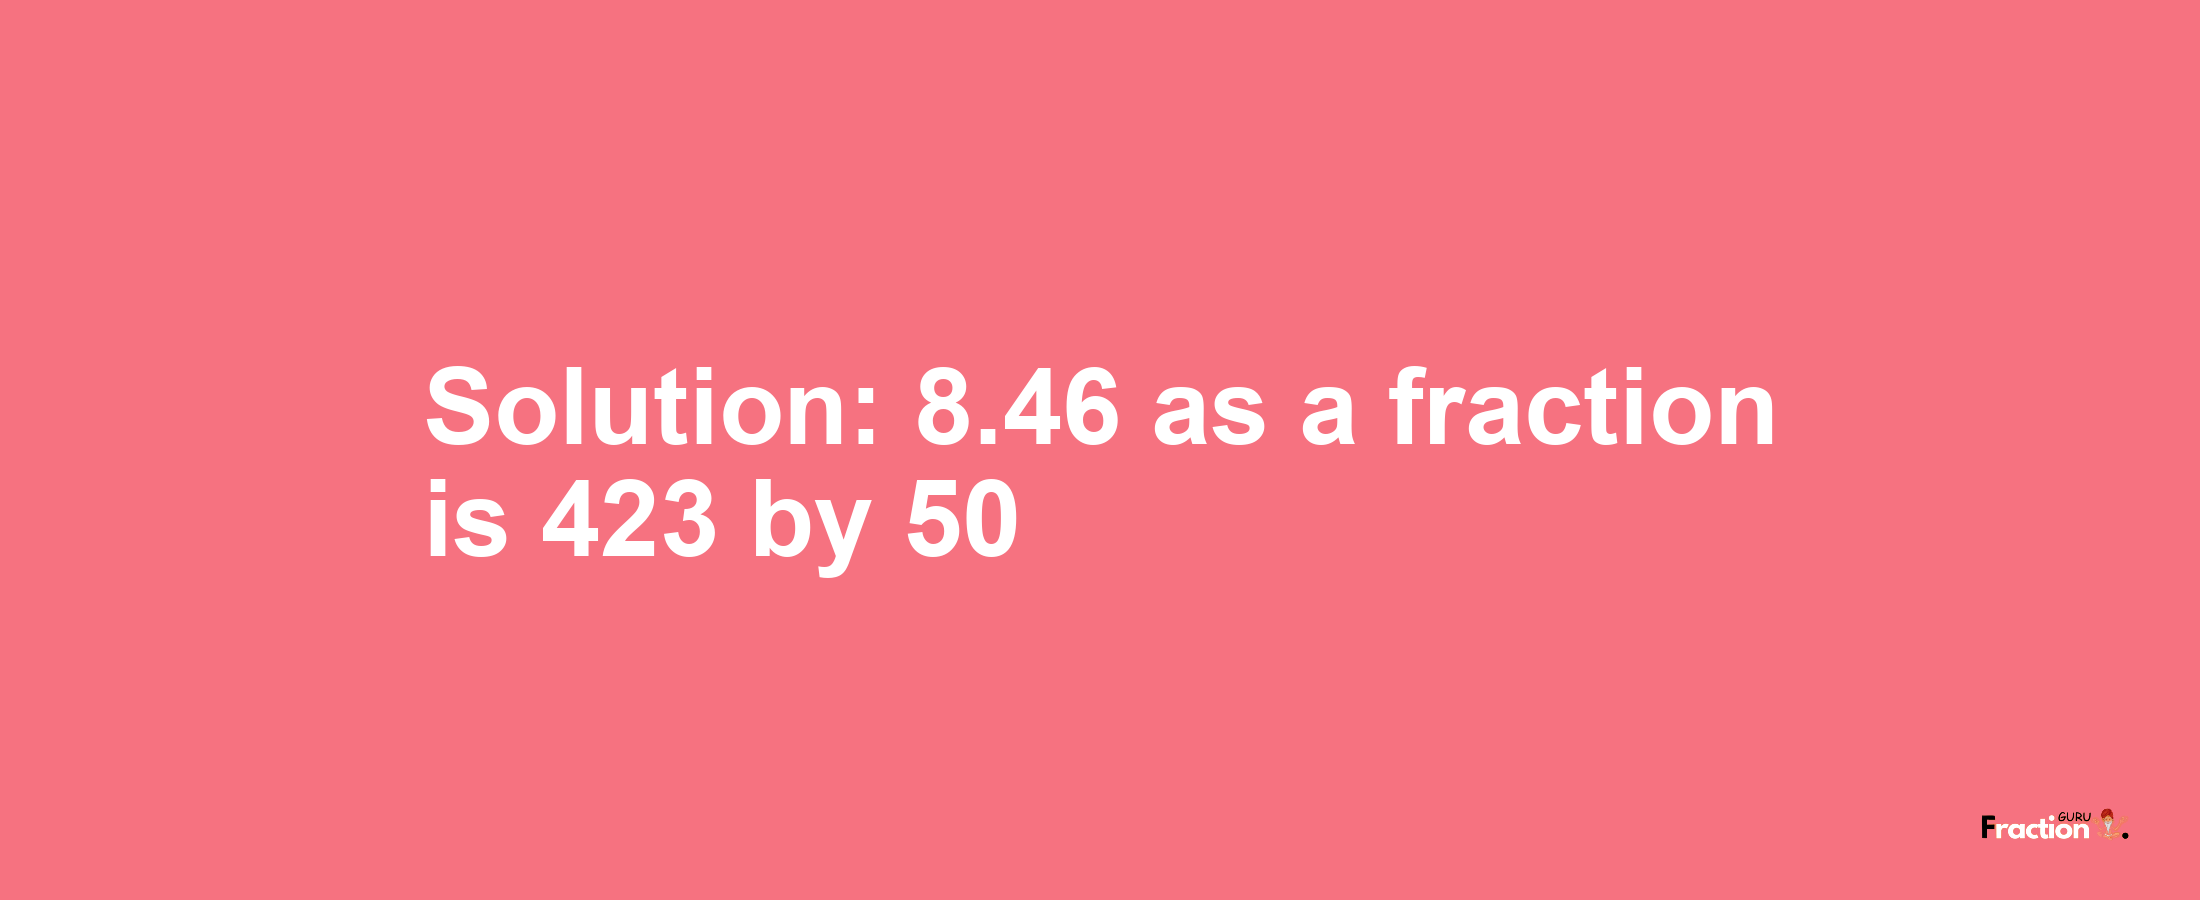 Solution:8.46 as a fraction is 423/50